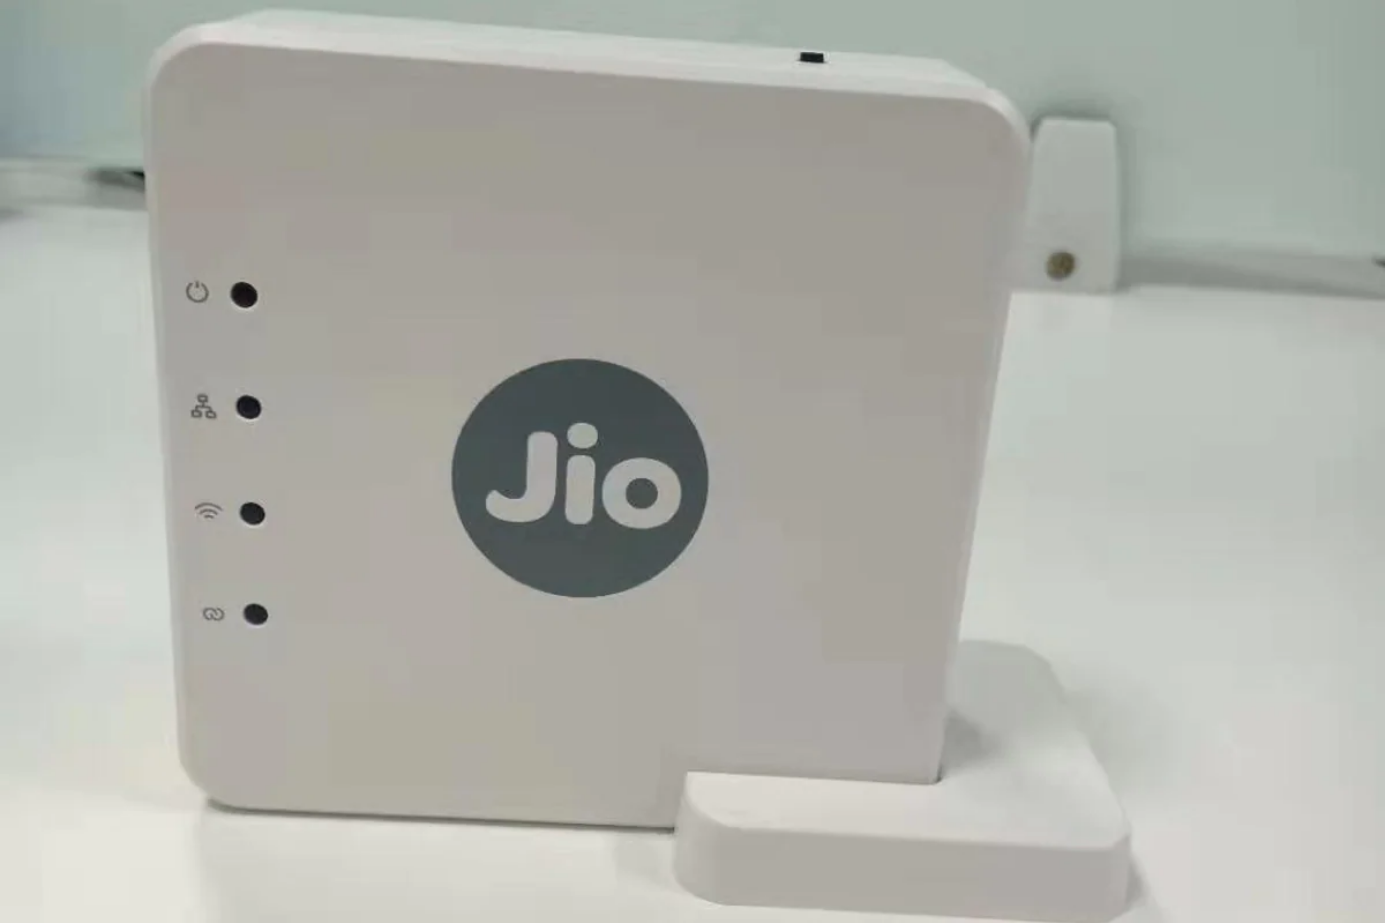 Jio Wi-Fi Mesh Router Surfaces Online With Price Details Ahead of Official Launch